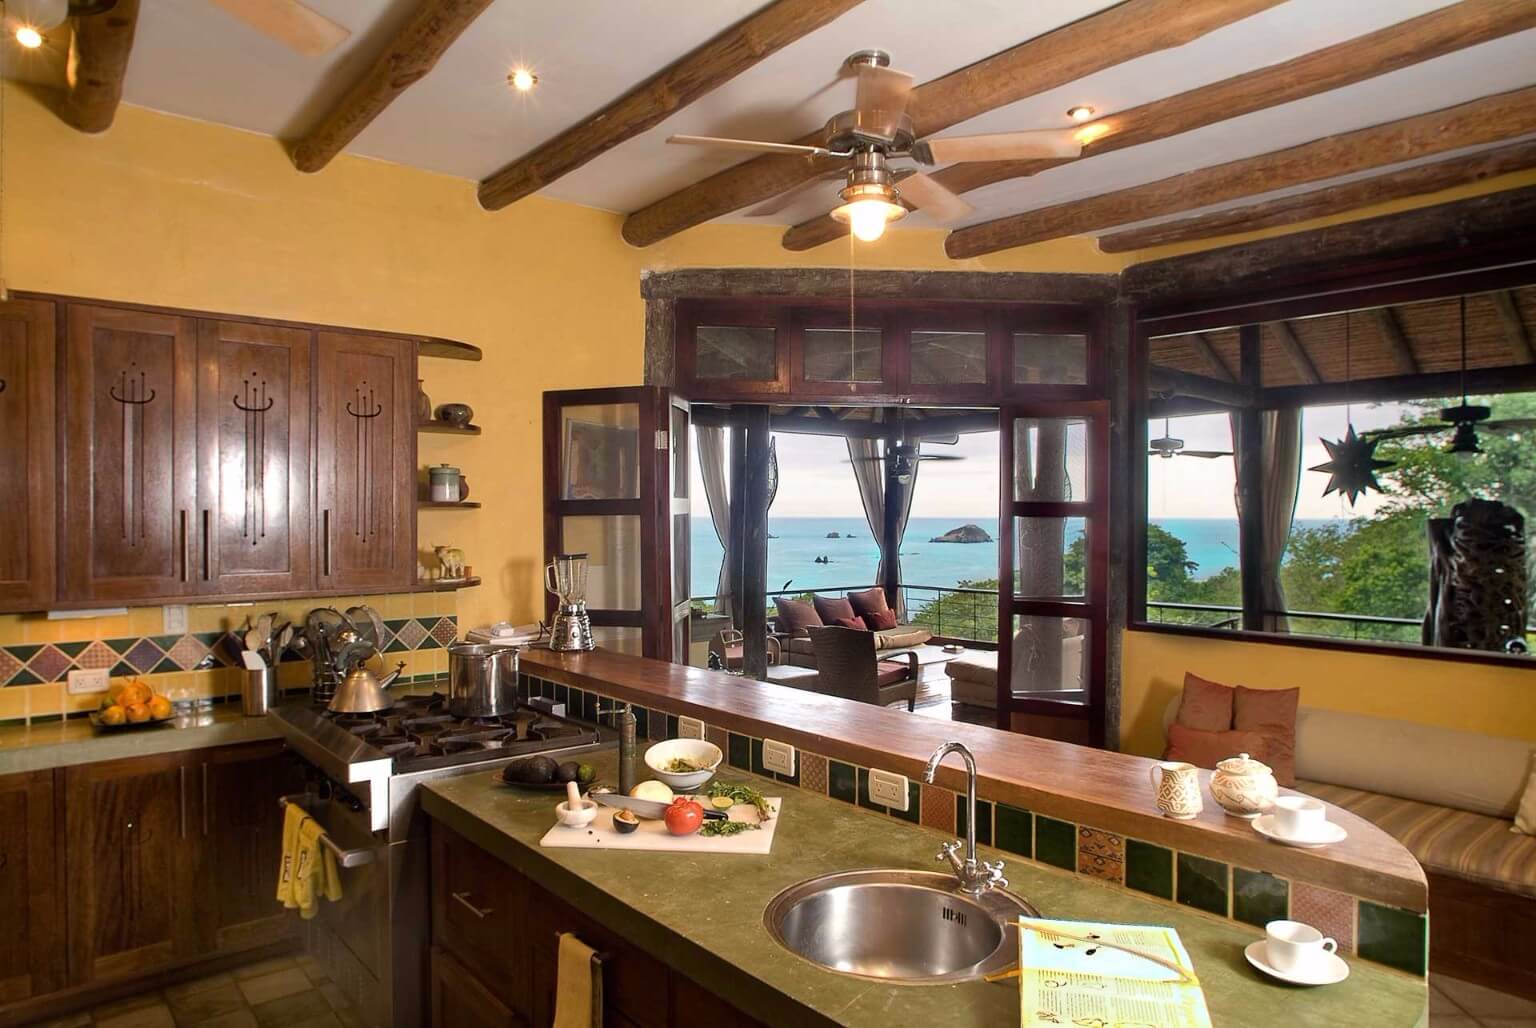 Ocean view from the kitchen